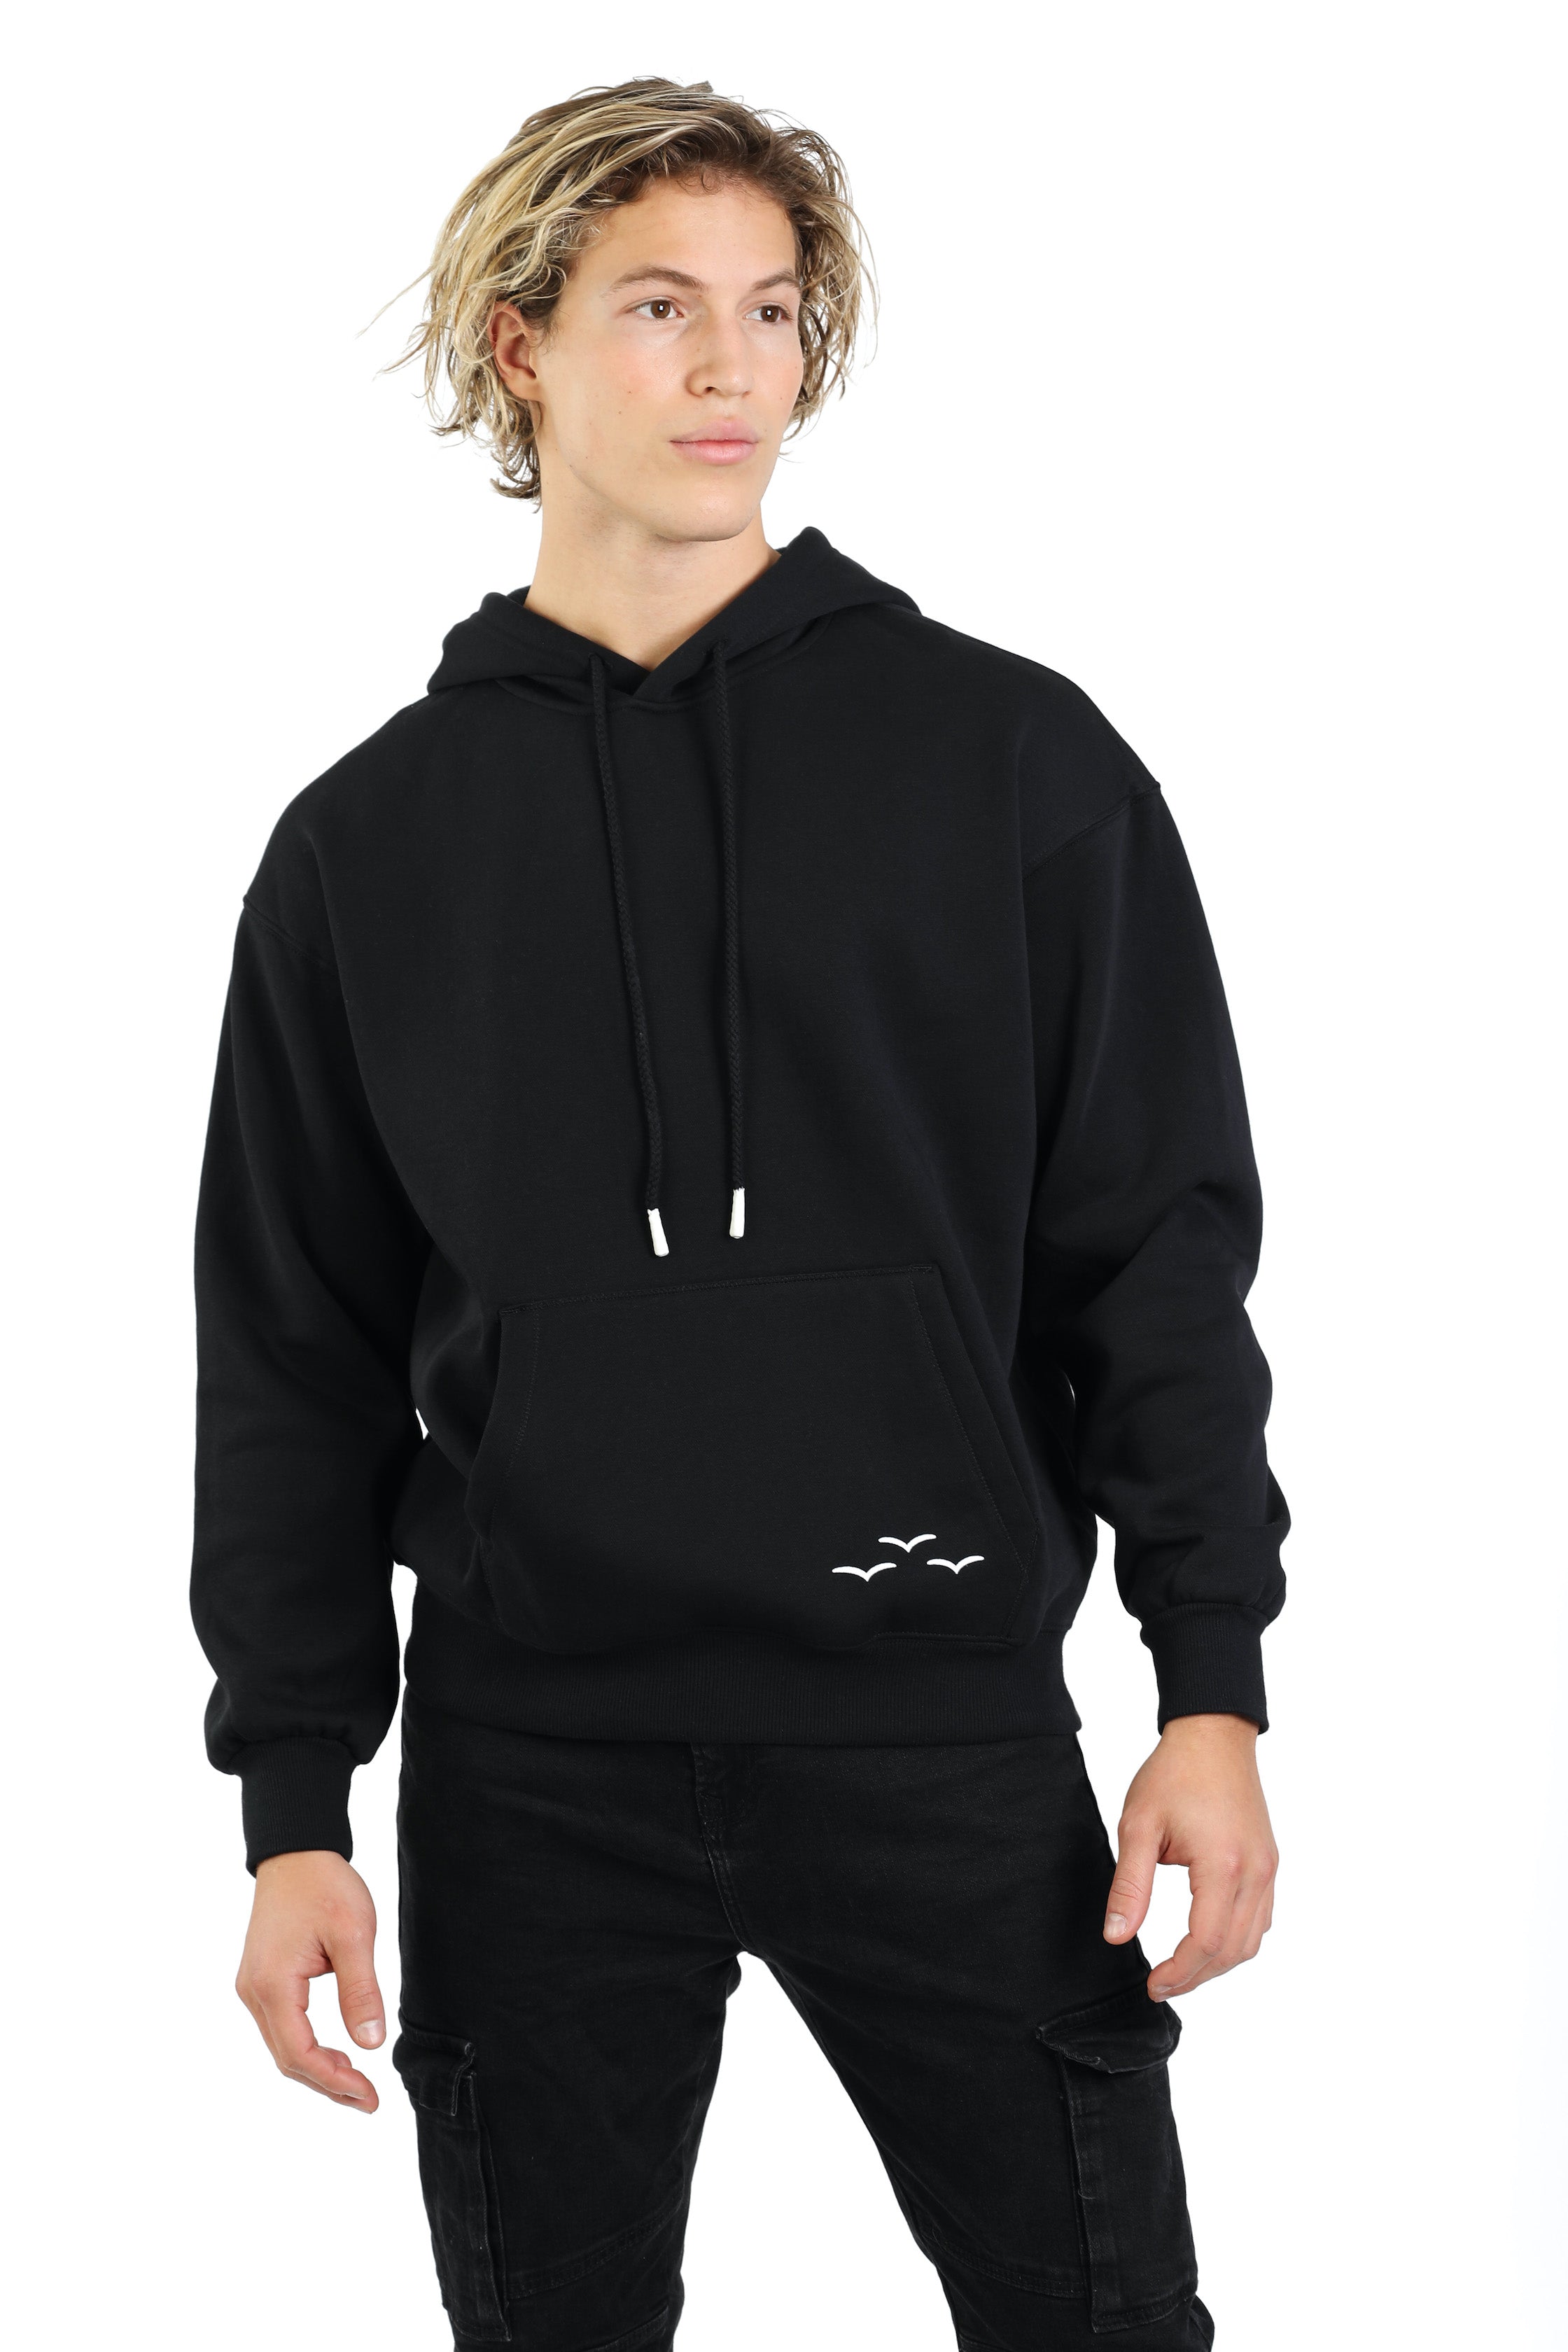 Follow Your Dreams Black Oversized Hoodie (Heavyweight) – Lazy Hippos